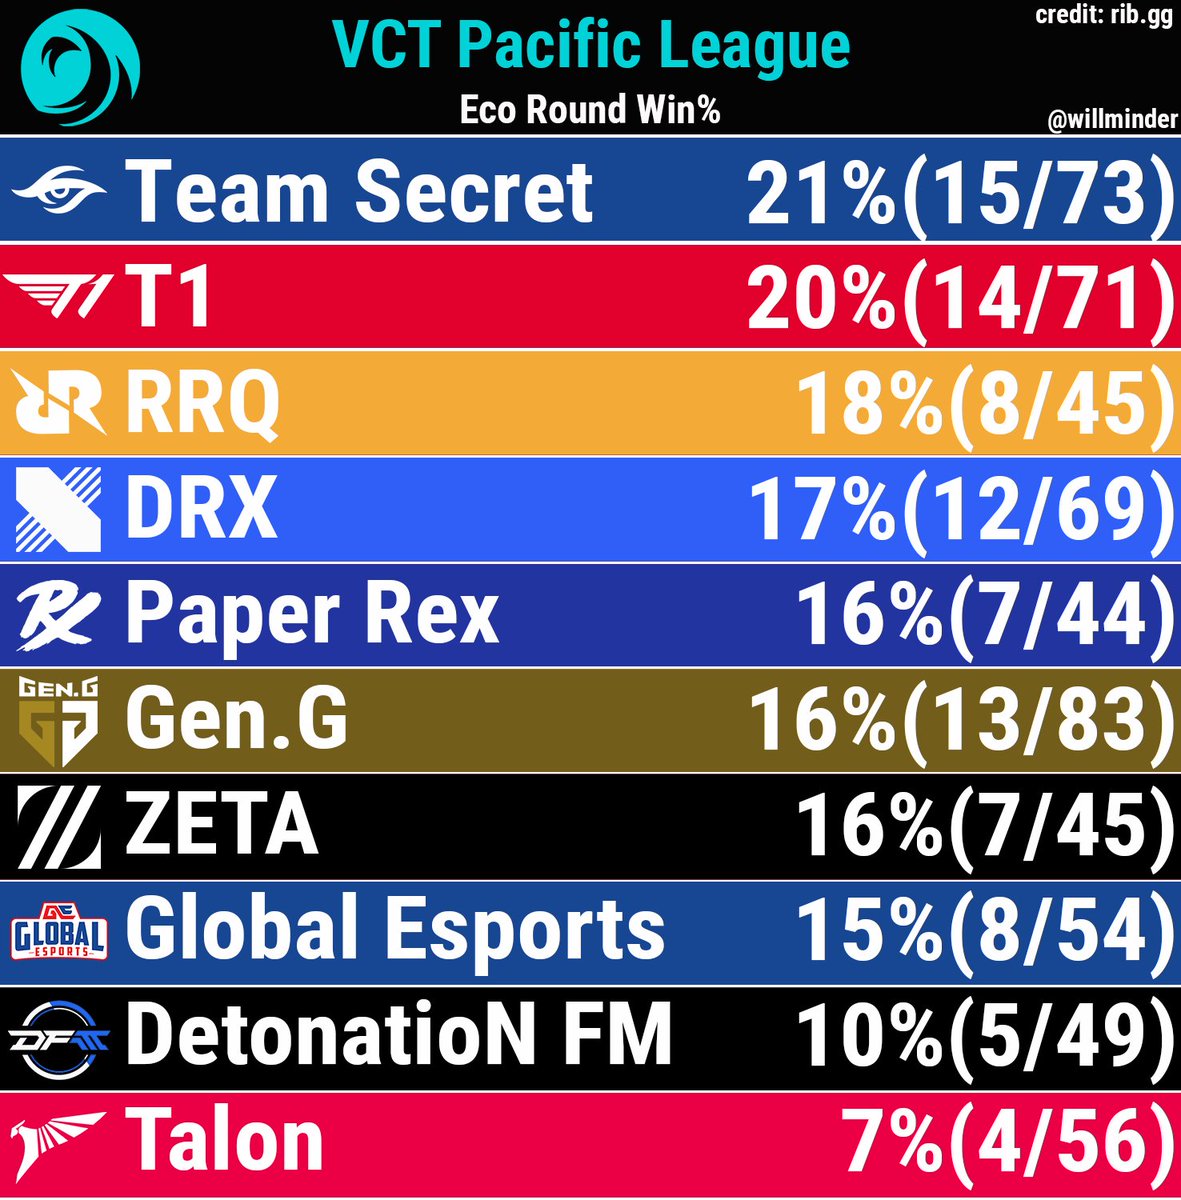 Eco round win rate for VCT Pacific teams